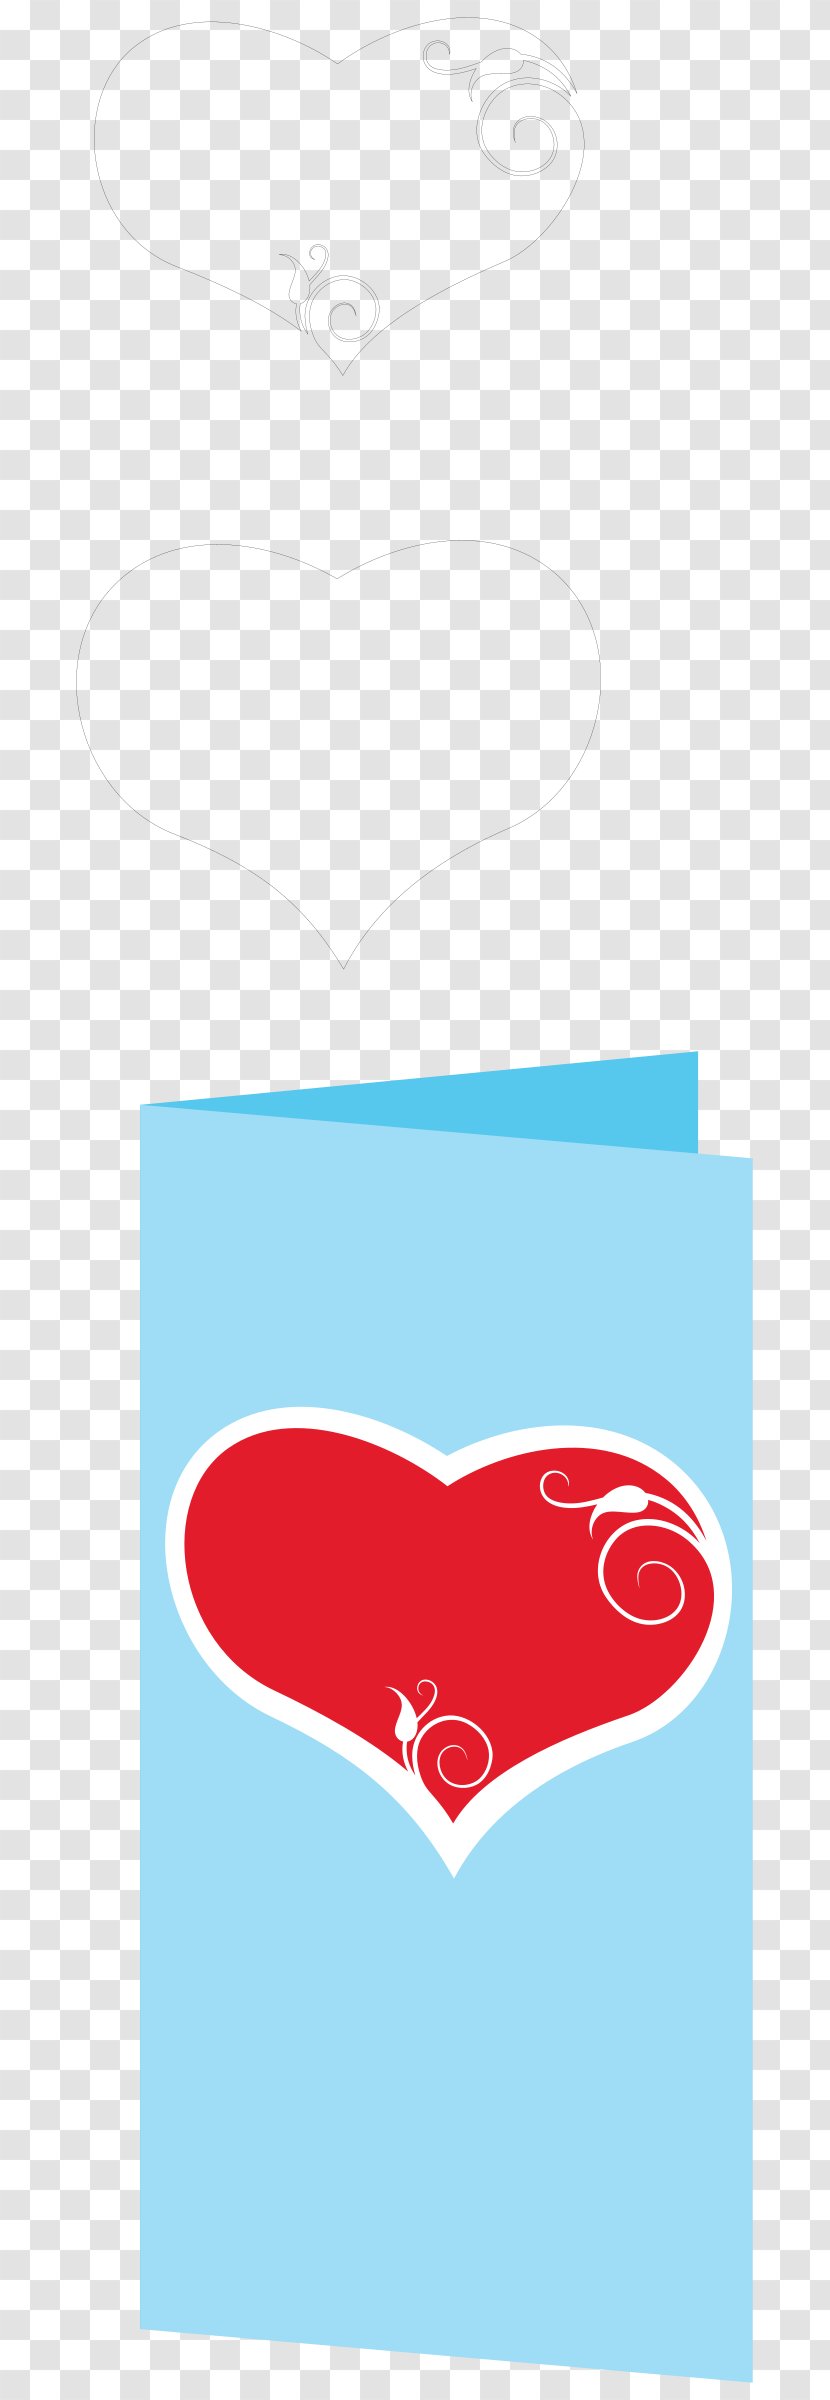 Playing Card Ace Of Hearts Knife King Spades Clip Art - Heart - Paper Cut Transparent PNG